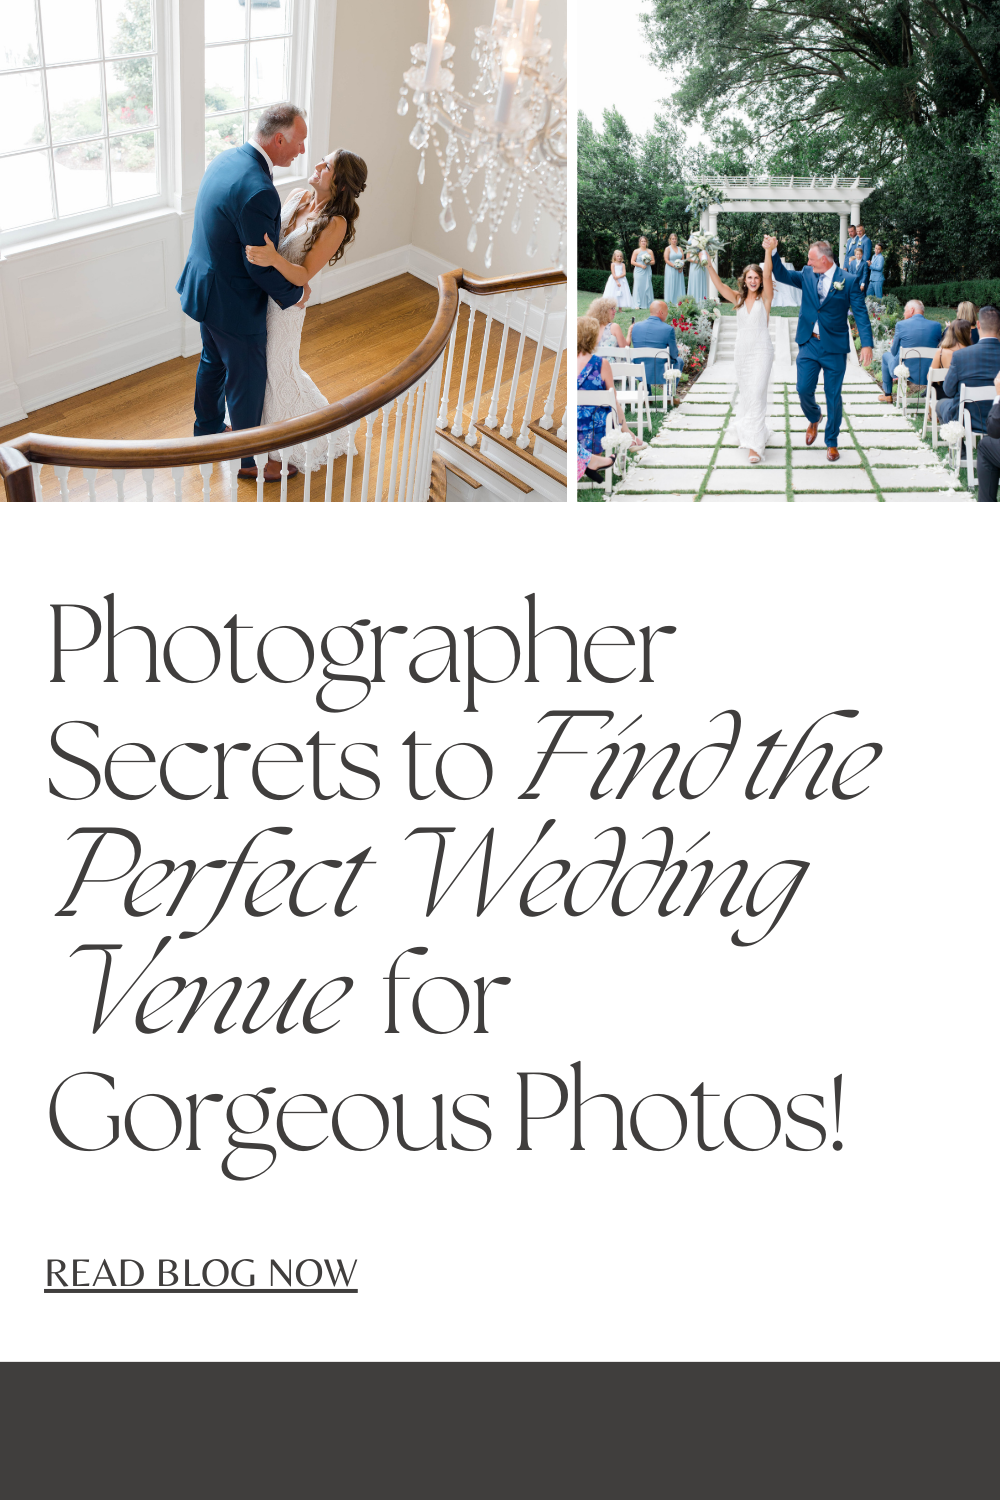 How to choose the ideal wedding venue for stunning photos